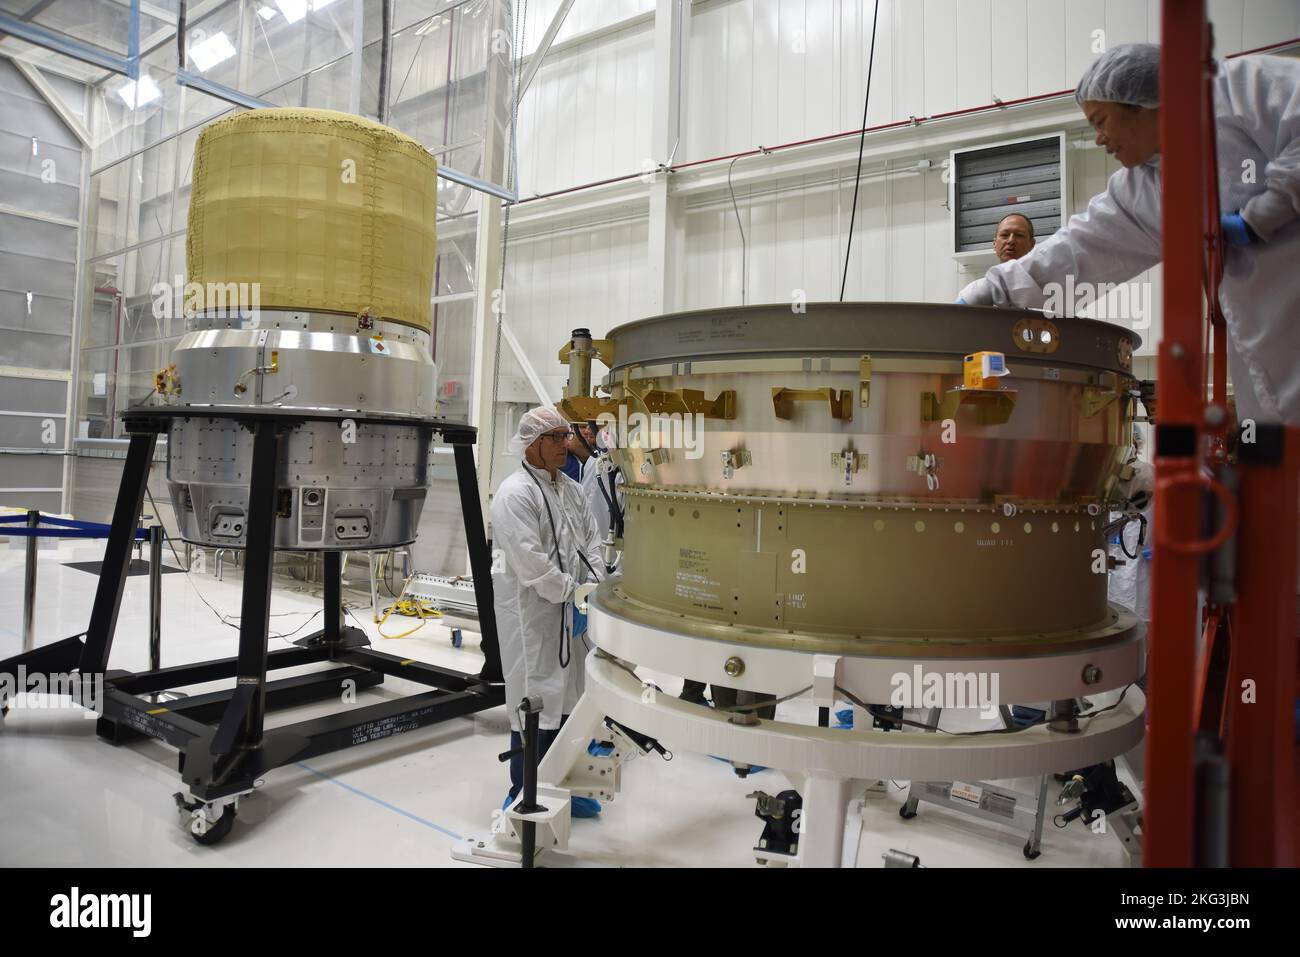 LOFTID Spacecraft Lift & Mate RV to RVPAIR/PLA. Technicians prepare the Low-Earth Orbit Flight Test of an Inflatable Decelerator (LOFTID) re-entry payload adapter interface ring for mating to the re-entry vehicle as part of launch preparations occurring inside Building 836 at Vandenberg Space Force Base (VSFB) in California on Sept. 7, 2022. LOFTID is the secondary payload on NASA and the National Oceanic and Atmospheric Administration’s (NOAA) Joint Polar Satellite System-2 (JPSS-2) satellite mission. JPSS-2 is the third satellite in the Joint Polar Satellite System series. It is scheduled to Stock Photo